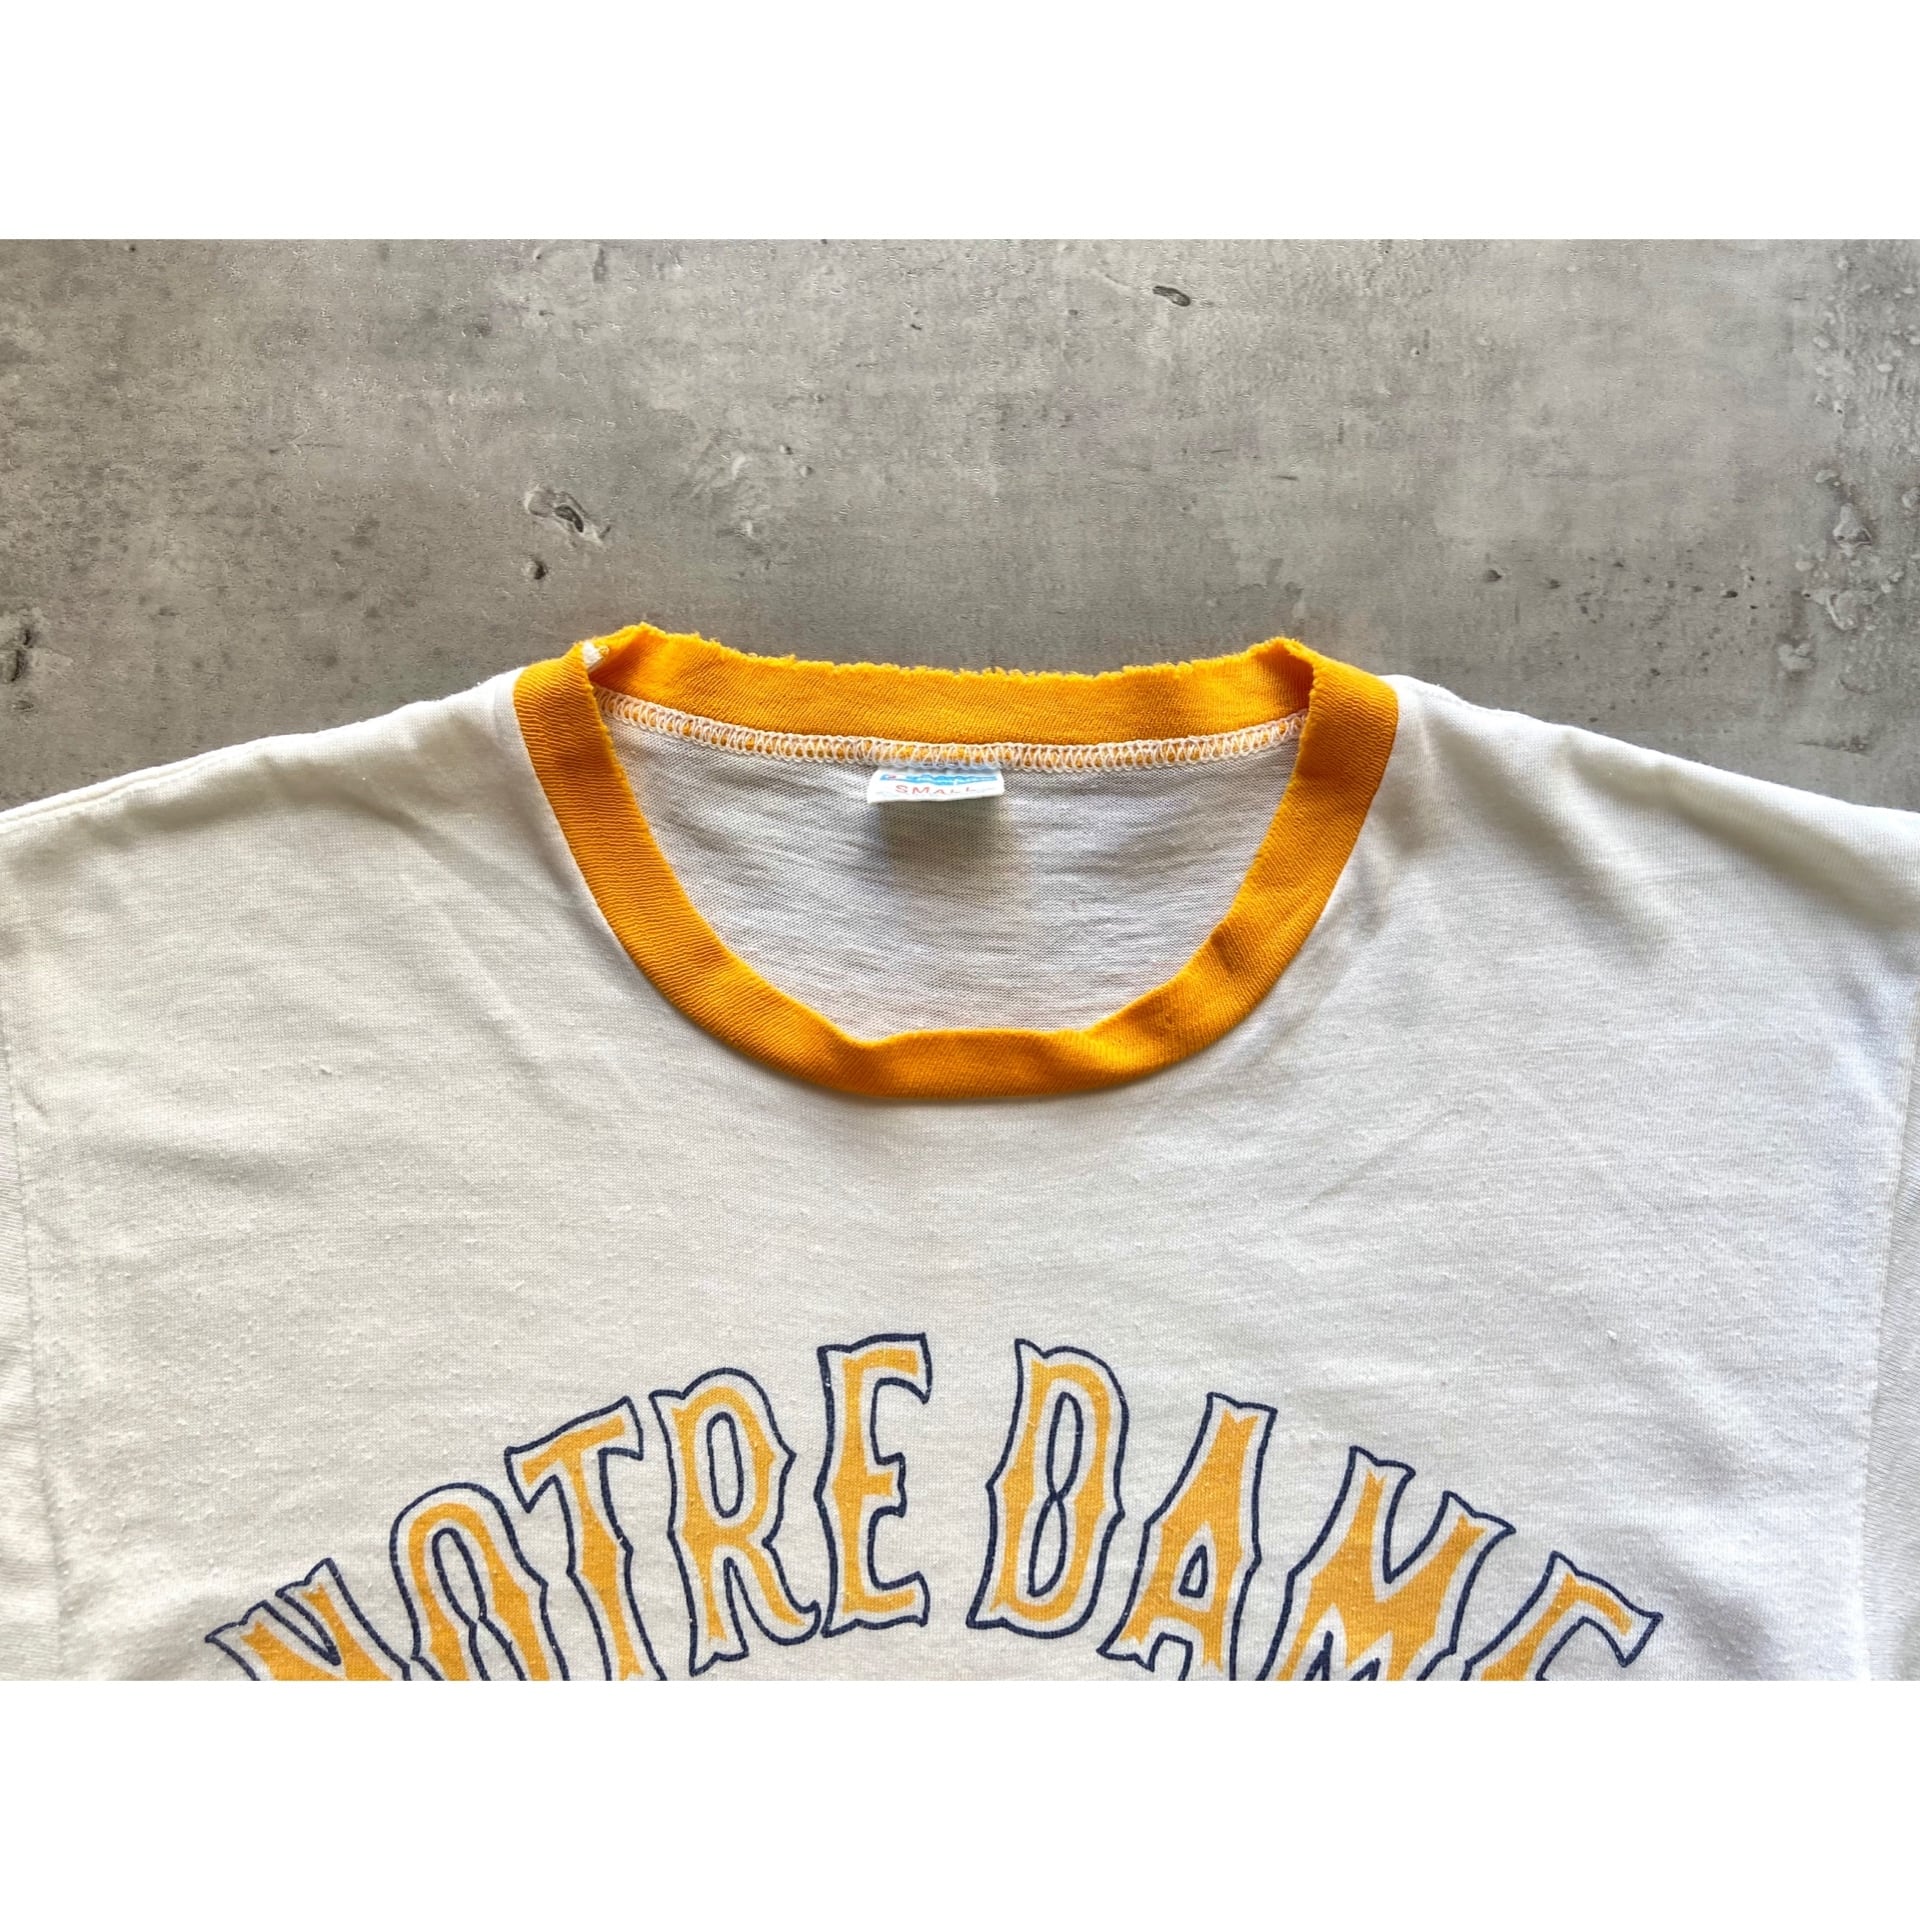 70s-80s champion s/s old ringer tee yellow 